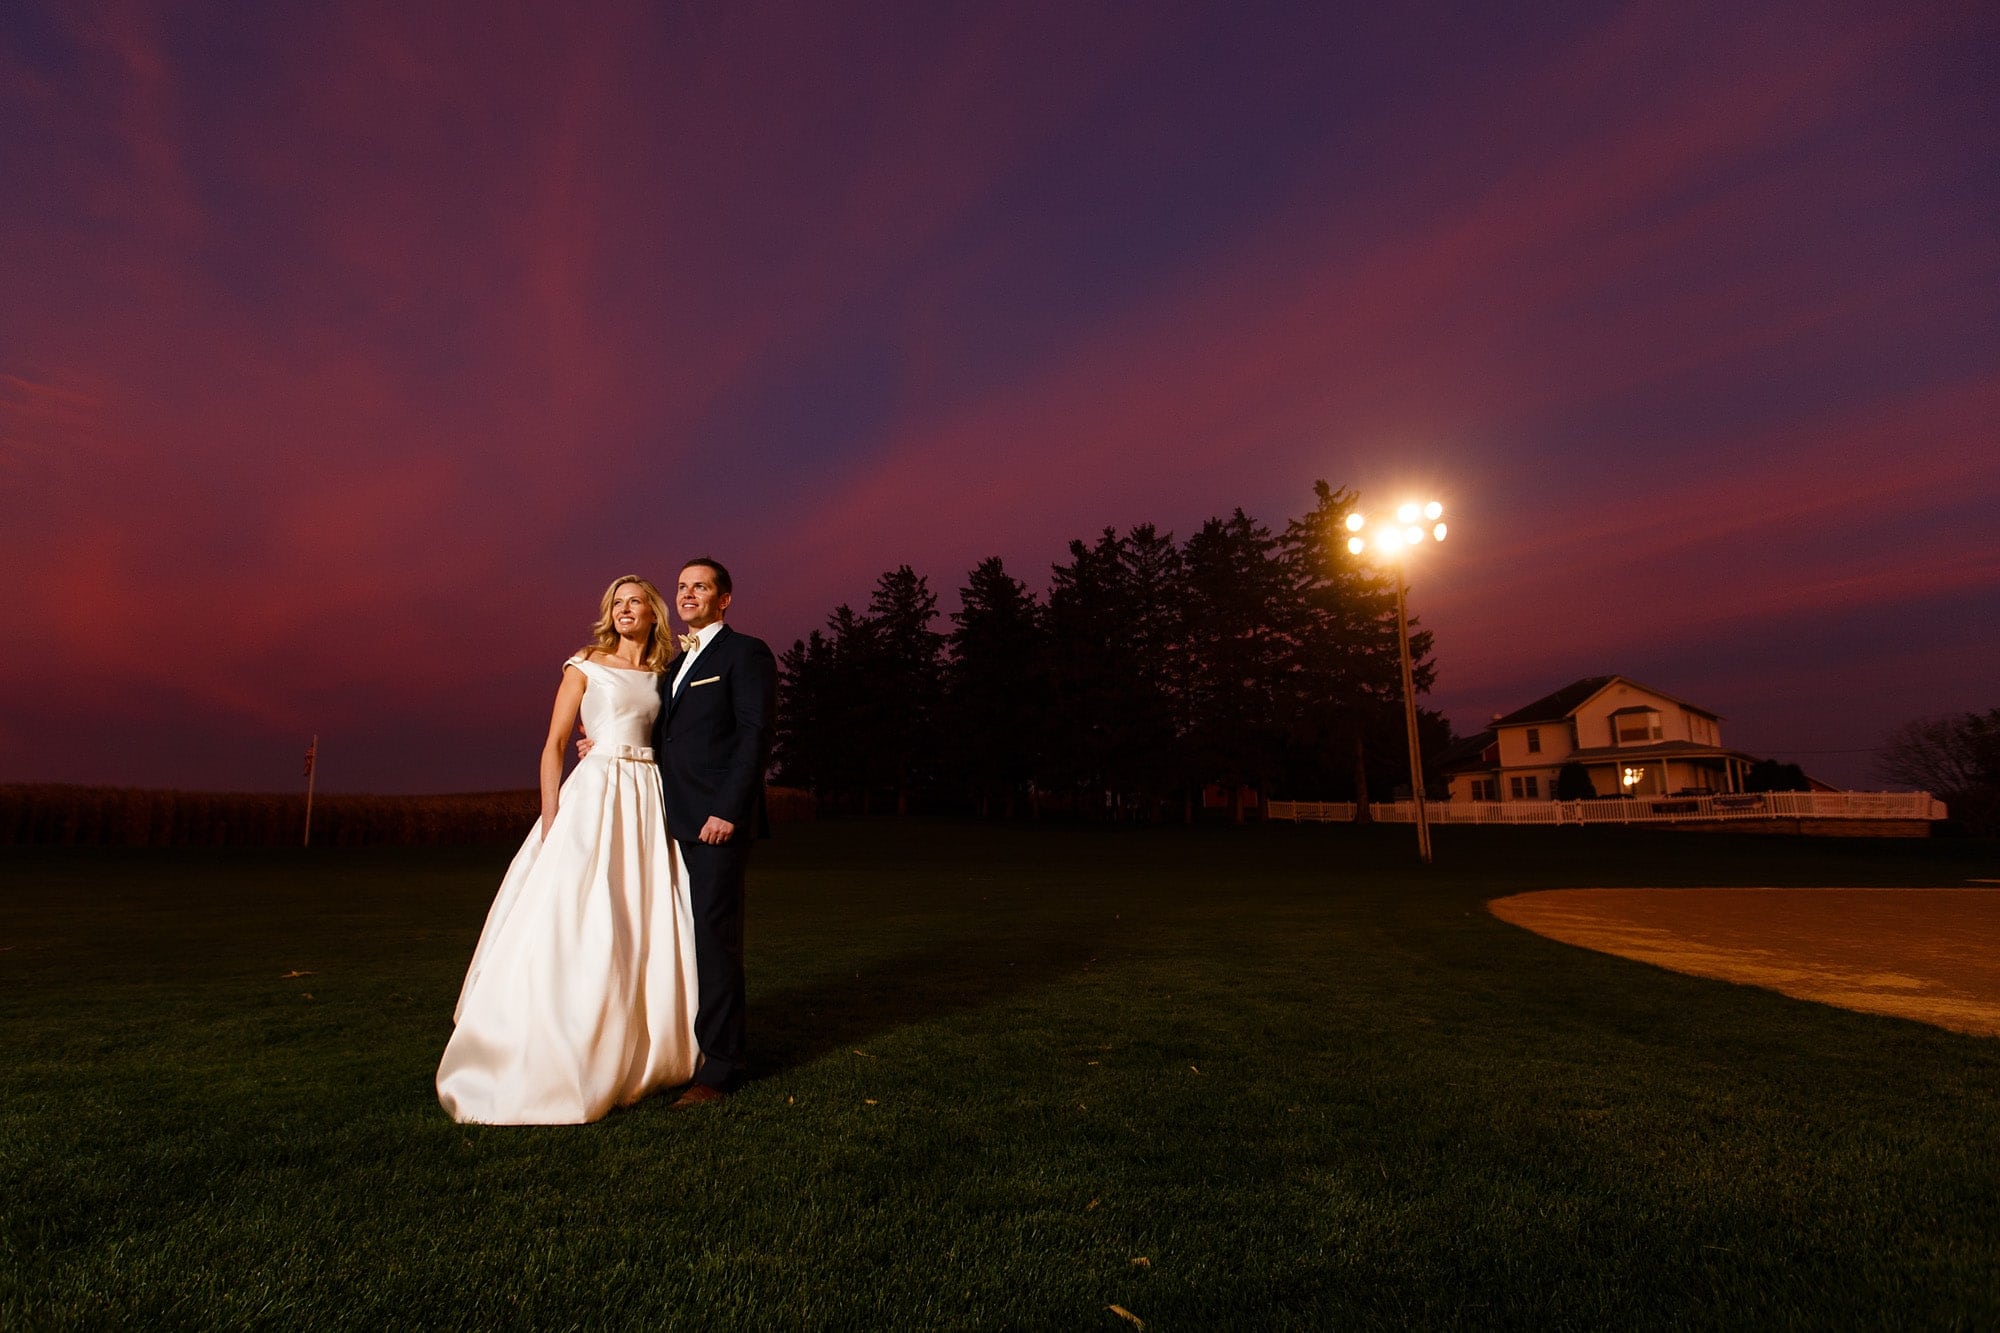 The sun sets as Shannon and David pose at the during their Field of Dreams wedding in Dyersville, Iowa